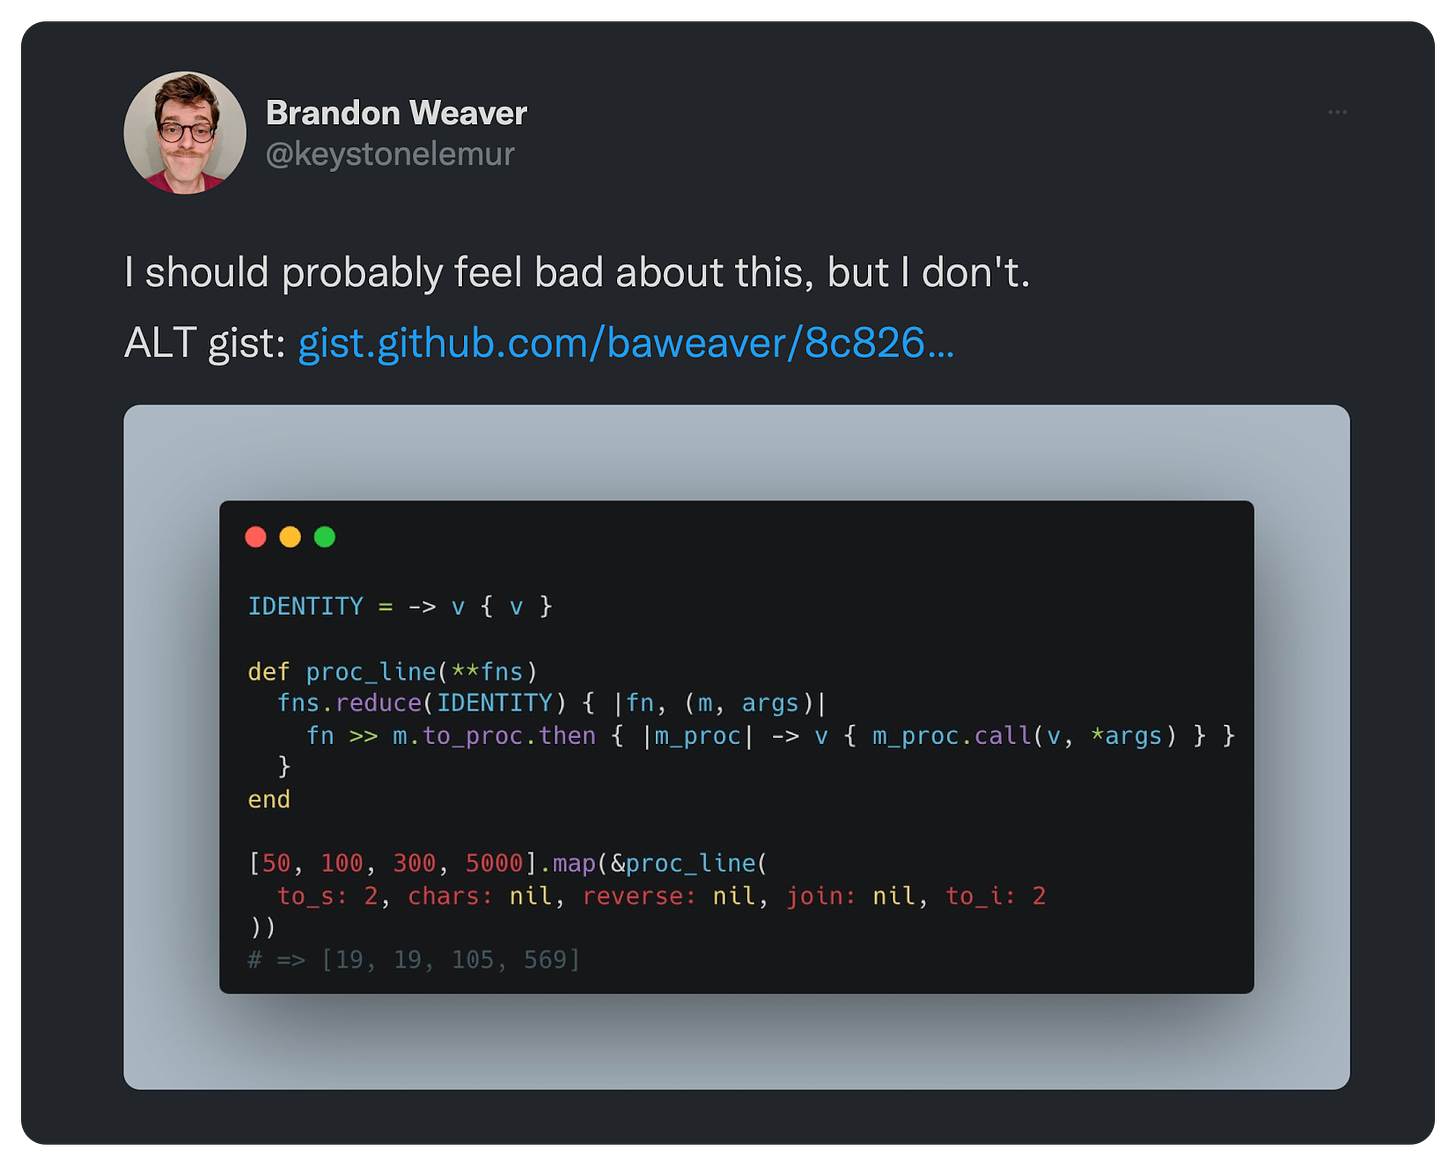 I should probably feel bad about this, but I don't. ALT gist: https://gist.github.com/baweaver/8c82642be77f99c943ea474751f64e05